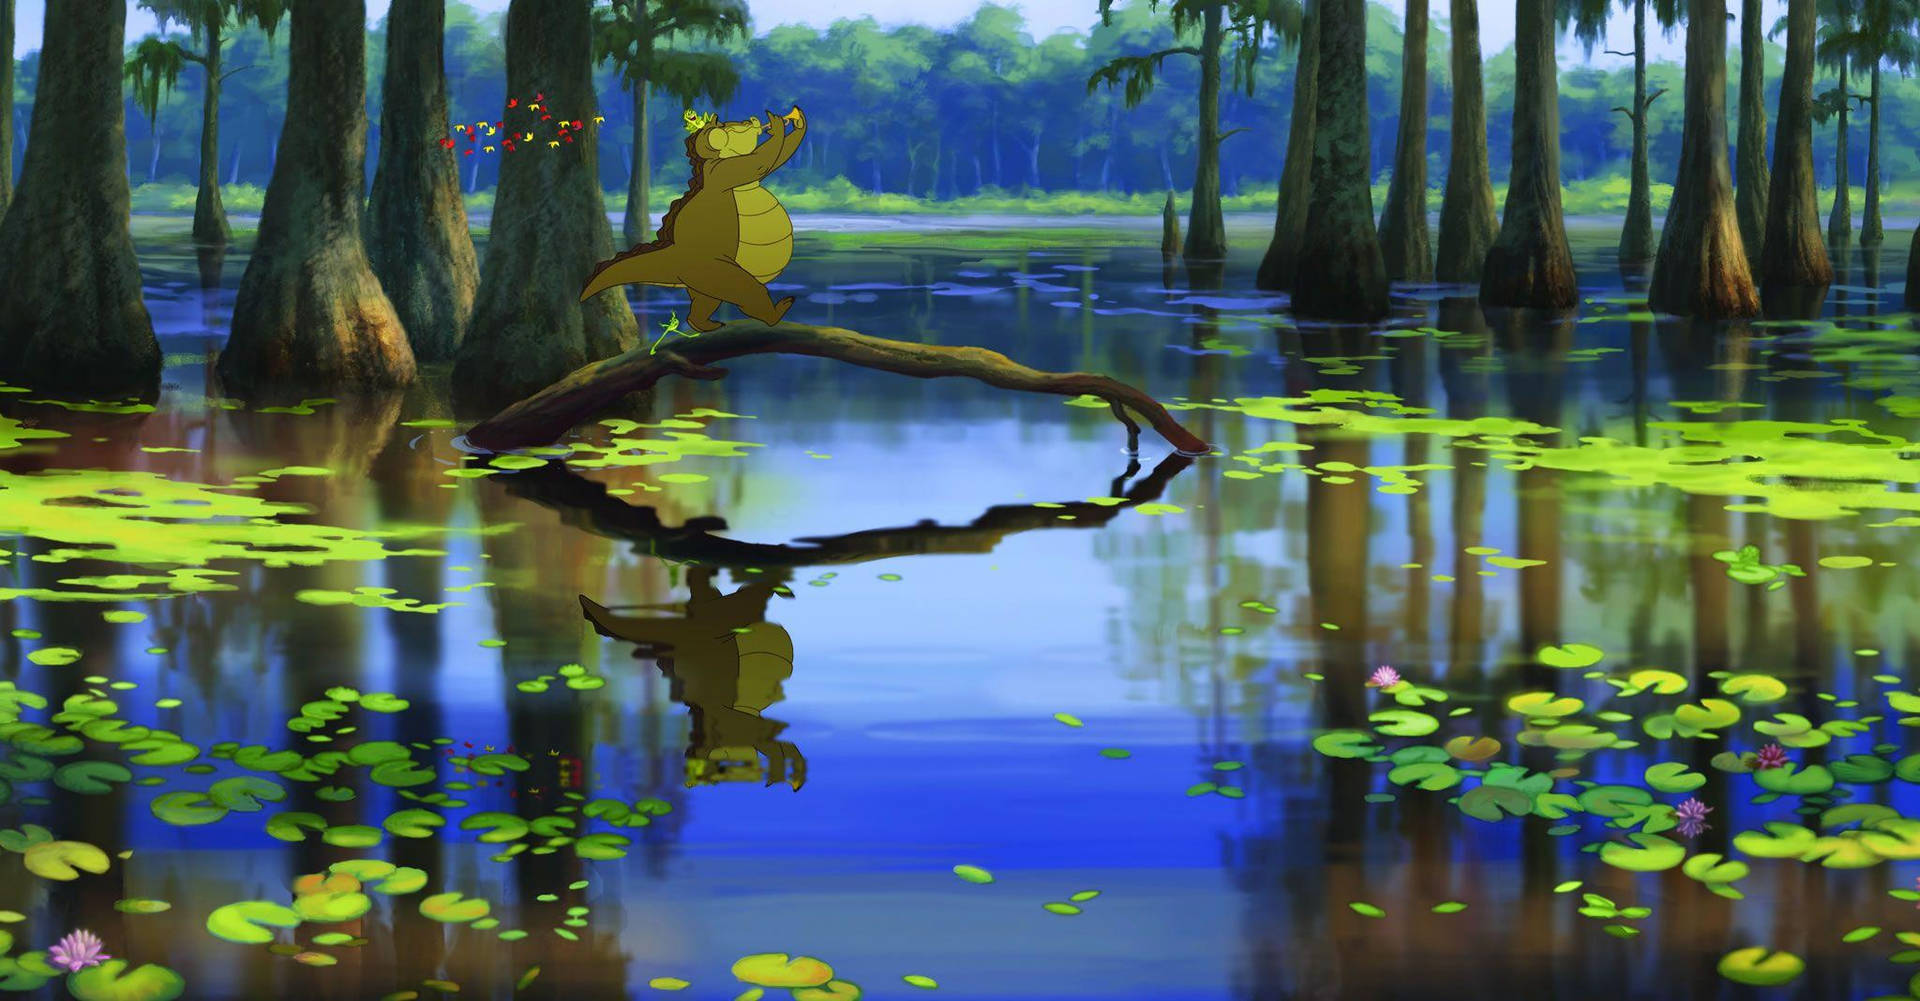 The Princess And The Frog In A Swamp Wallpaper